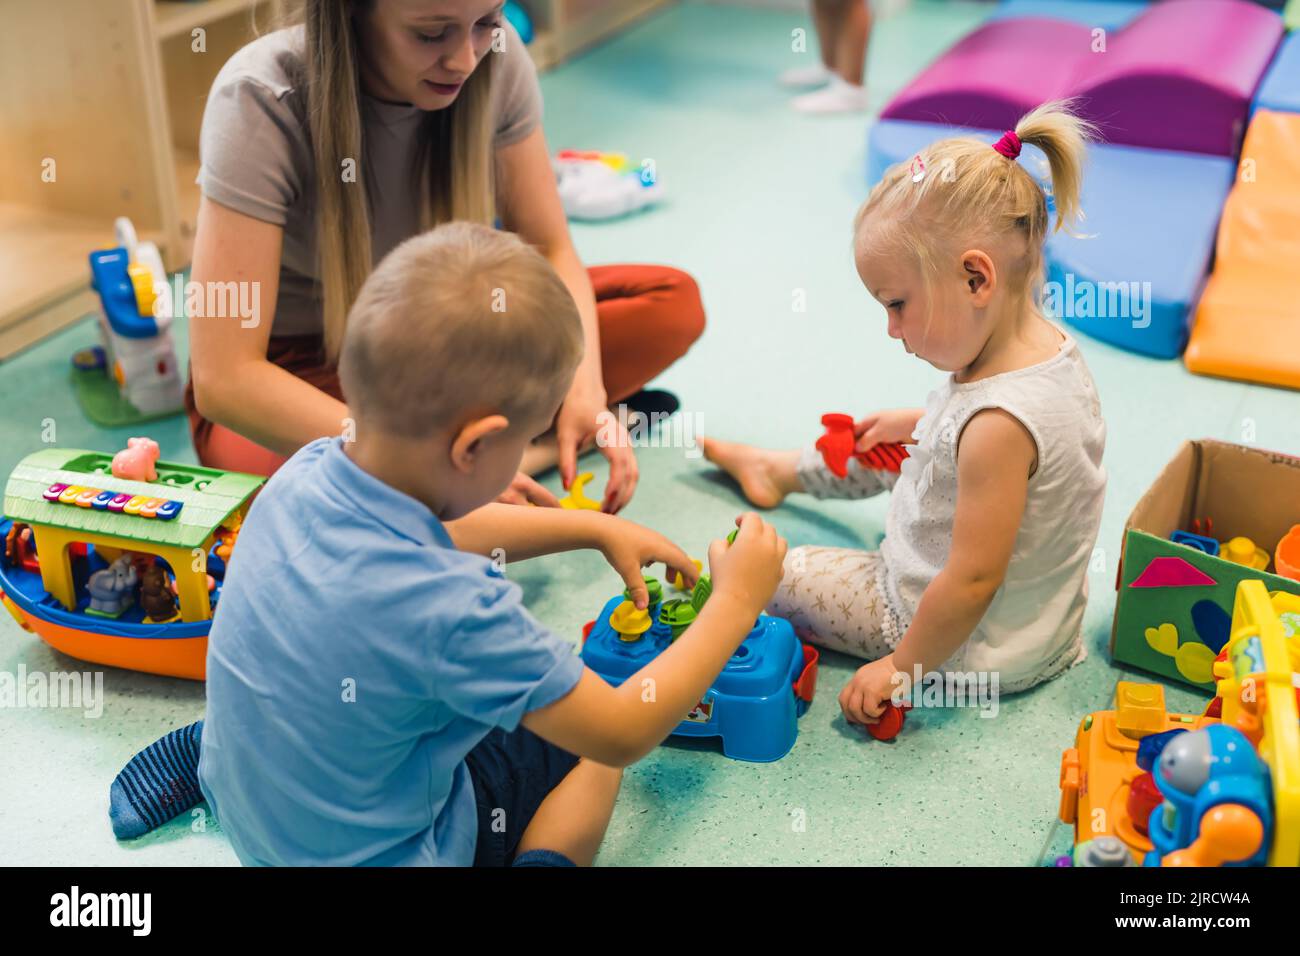 Learning through sensory play at the nursery school. Caucasian toddlers and their teacher playing with a colorful plastic shape sorter set, playhouses, building blocks, cars and boats. Imagination, creativity, fine motor and gross motor skills development. High quality photo Stock Photo